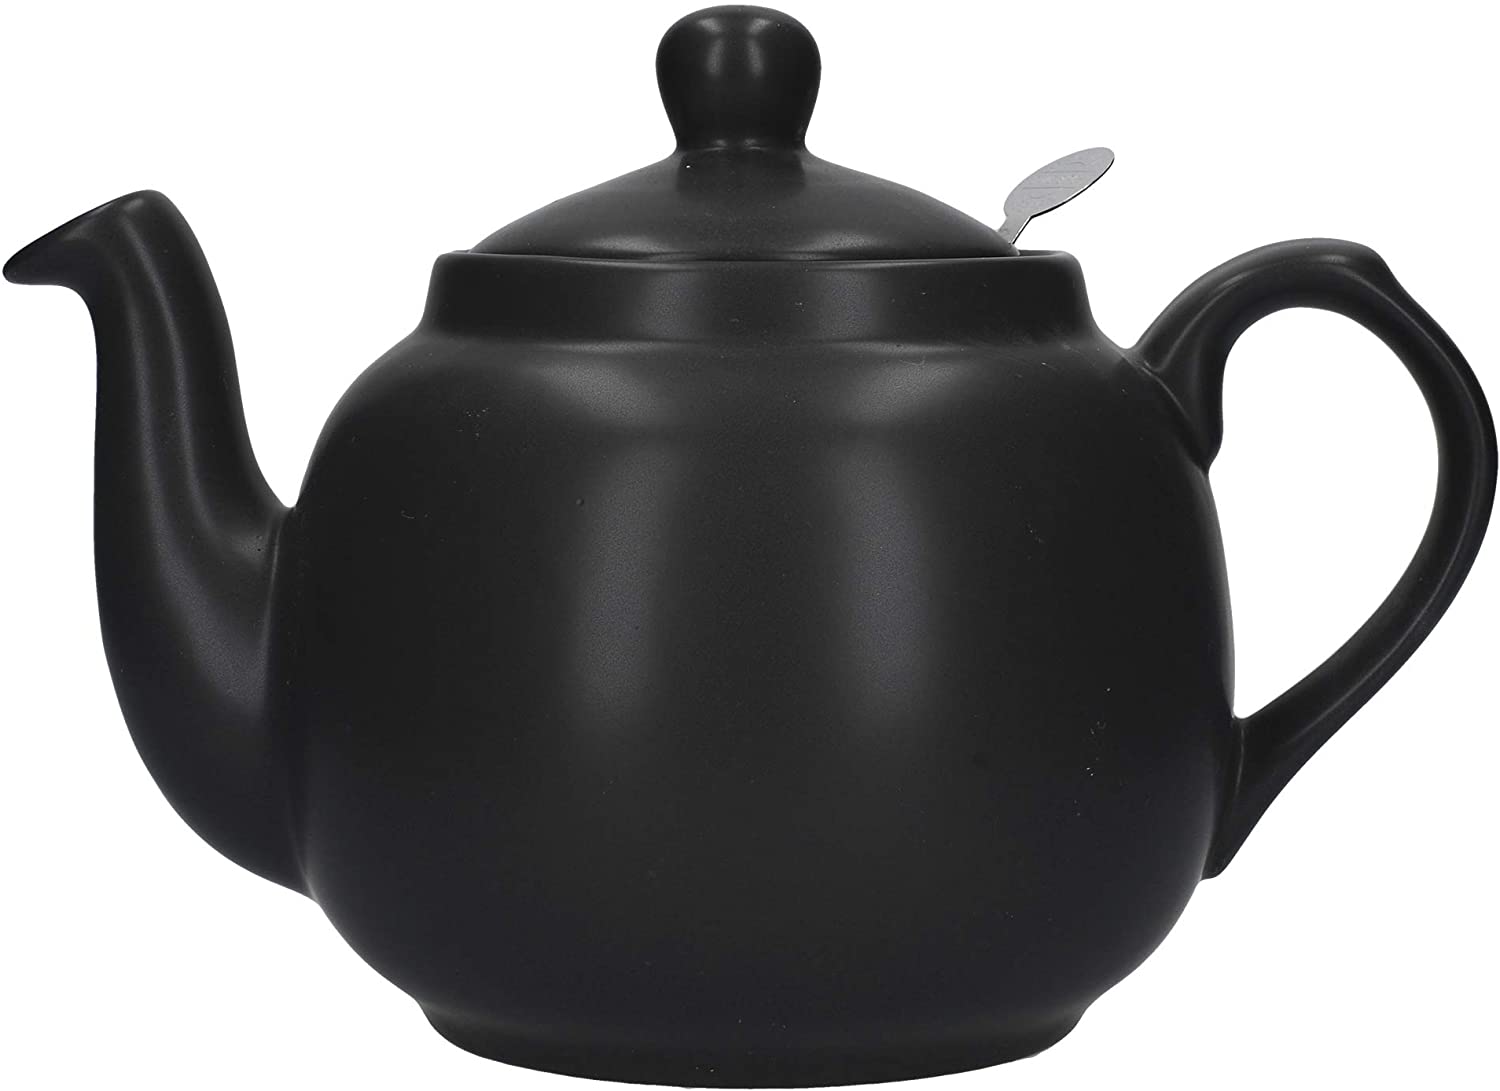 Dexam London Pottery 2 Cup Teapot with Filter, Green, Ceramic, Matte Black, 4 Cup